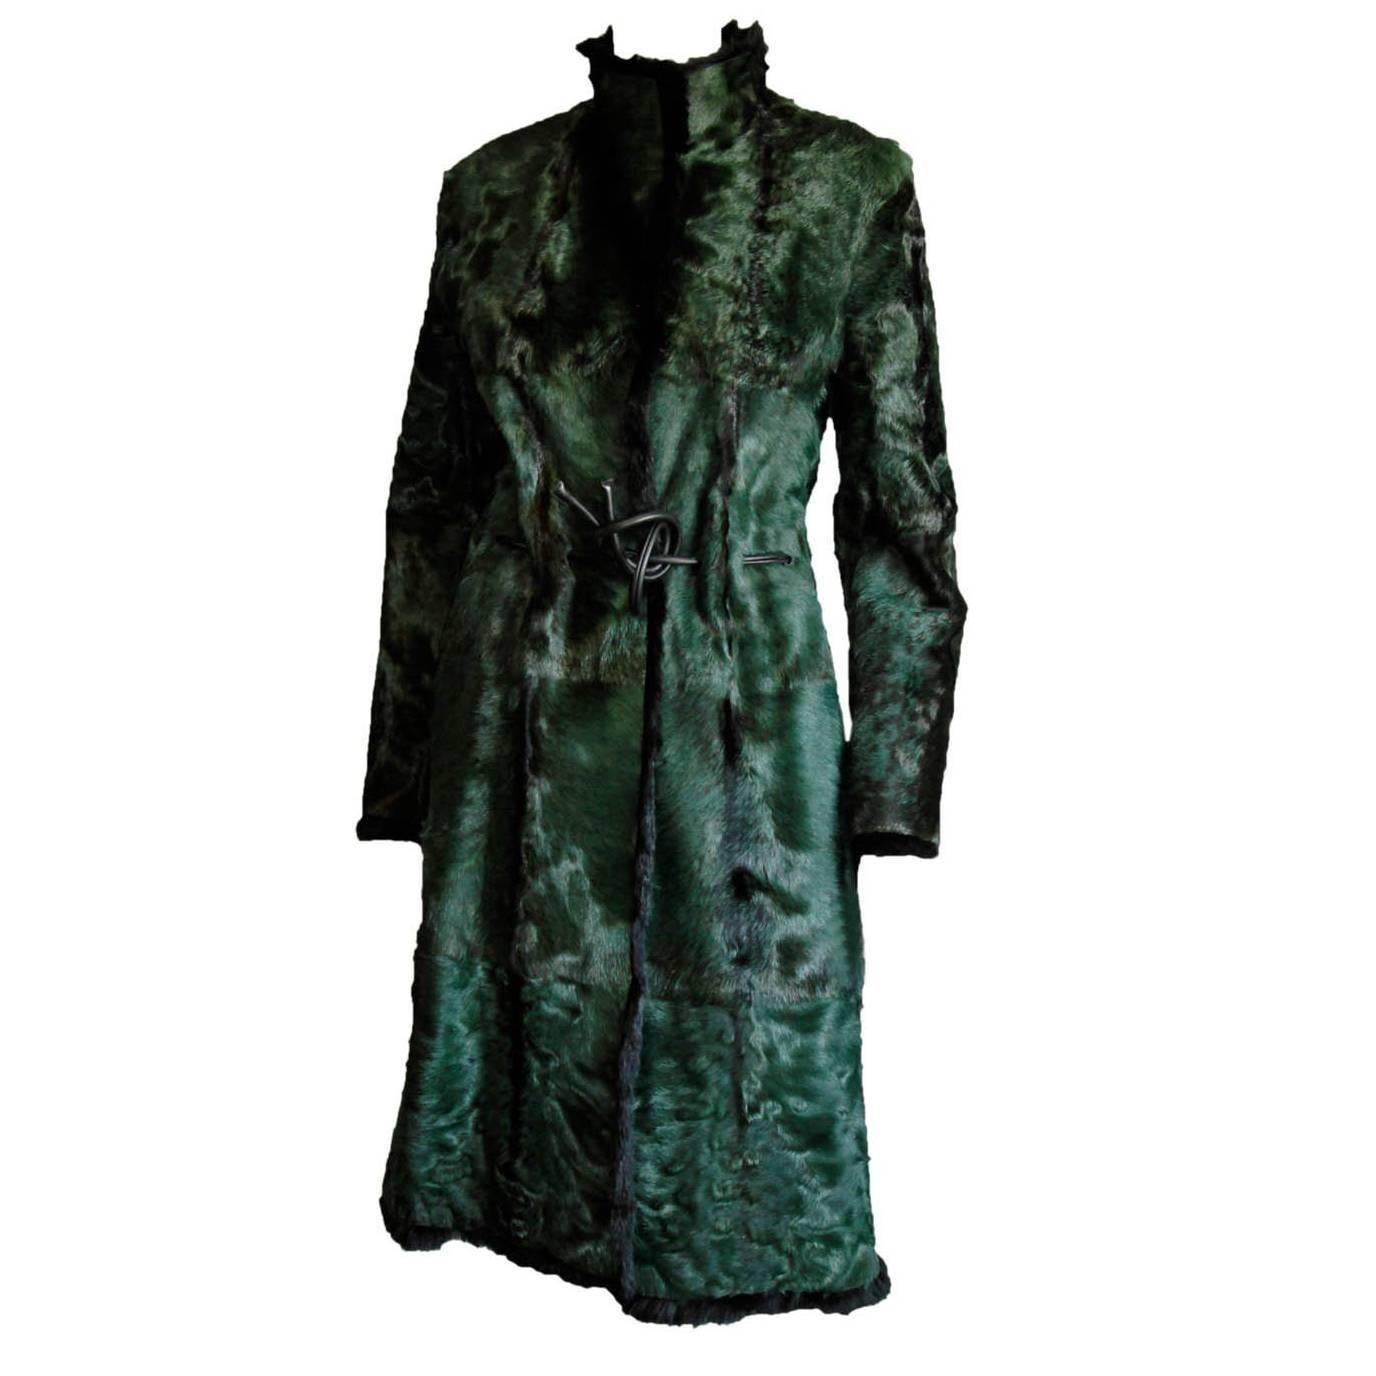 Tom Ford for Gucci 1999 Collection Reversible Emerald Green Fur Coat It. 40